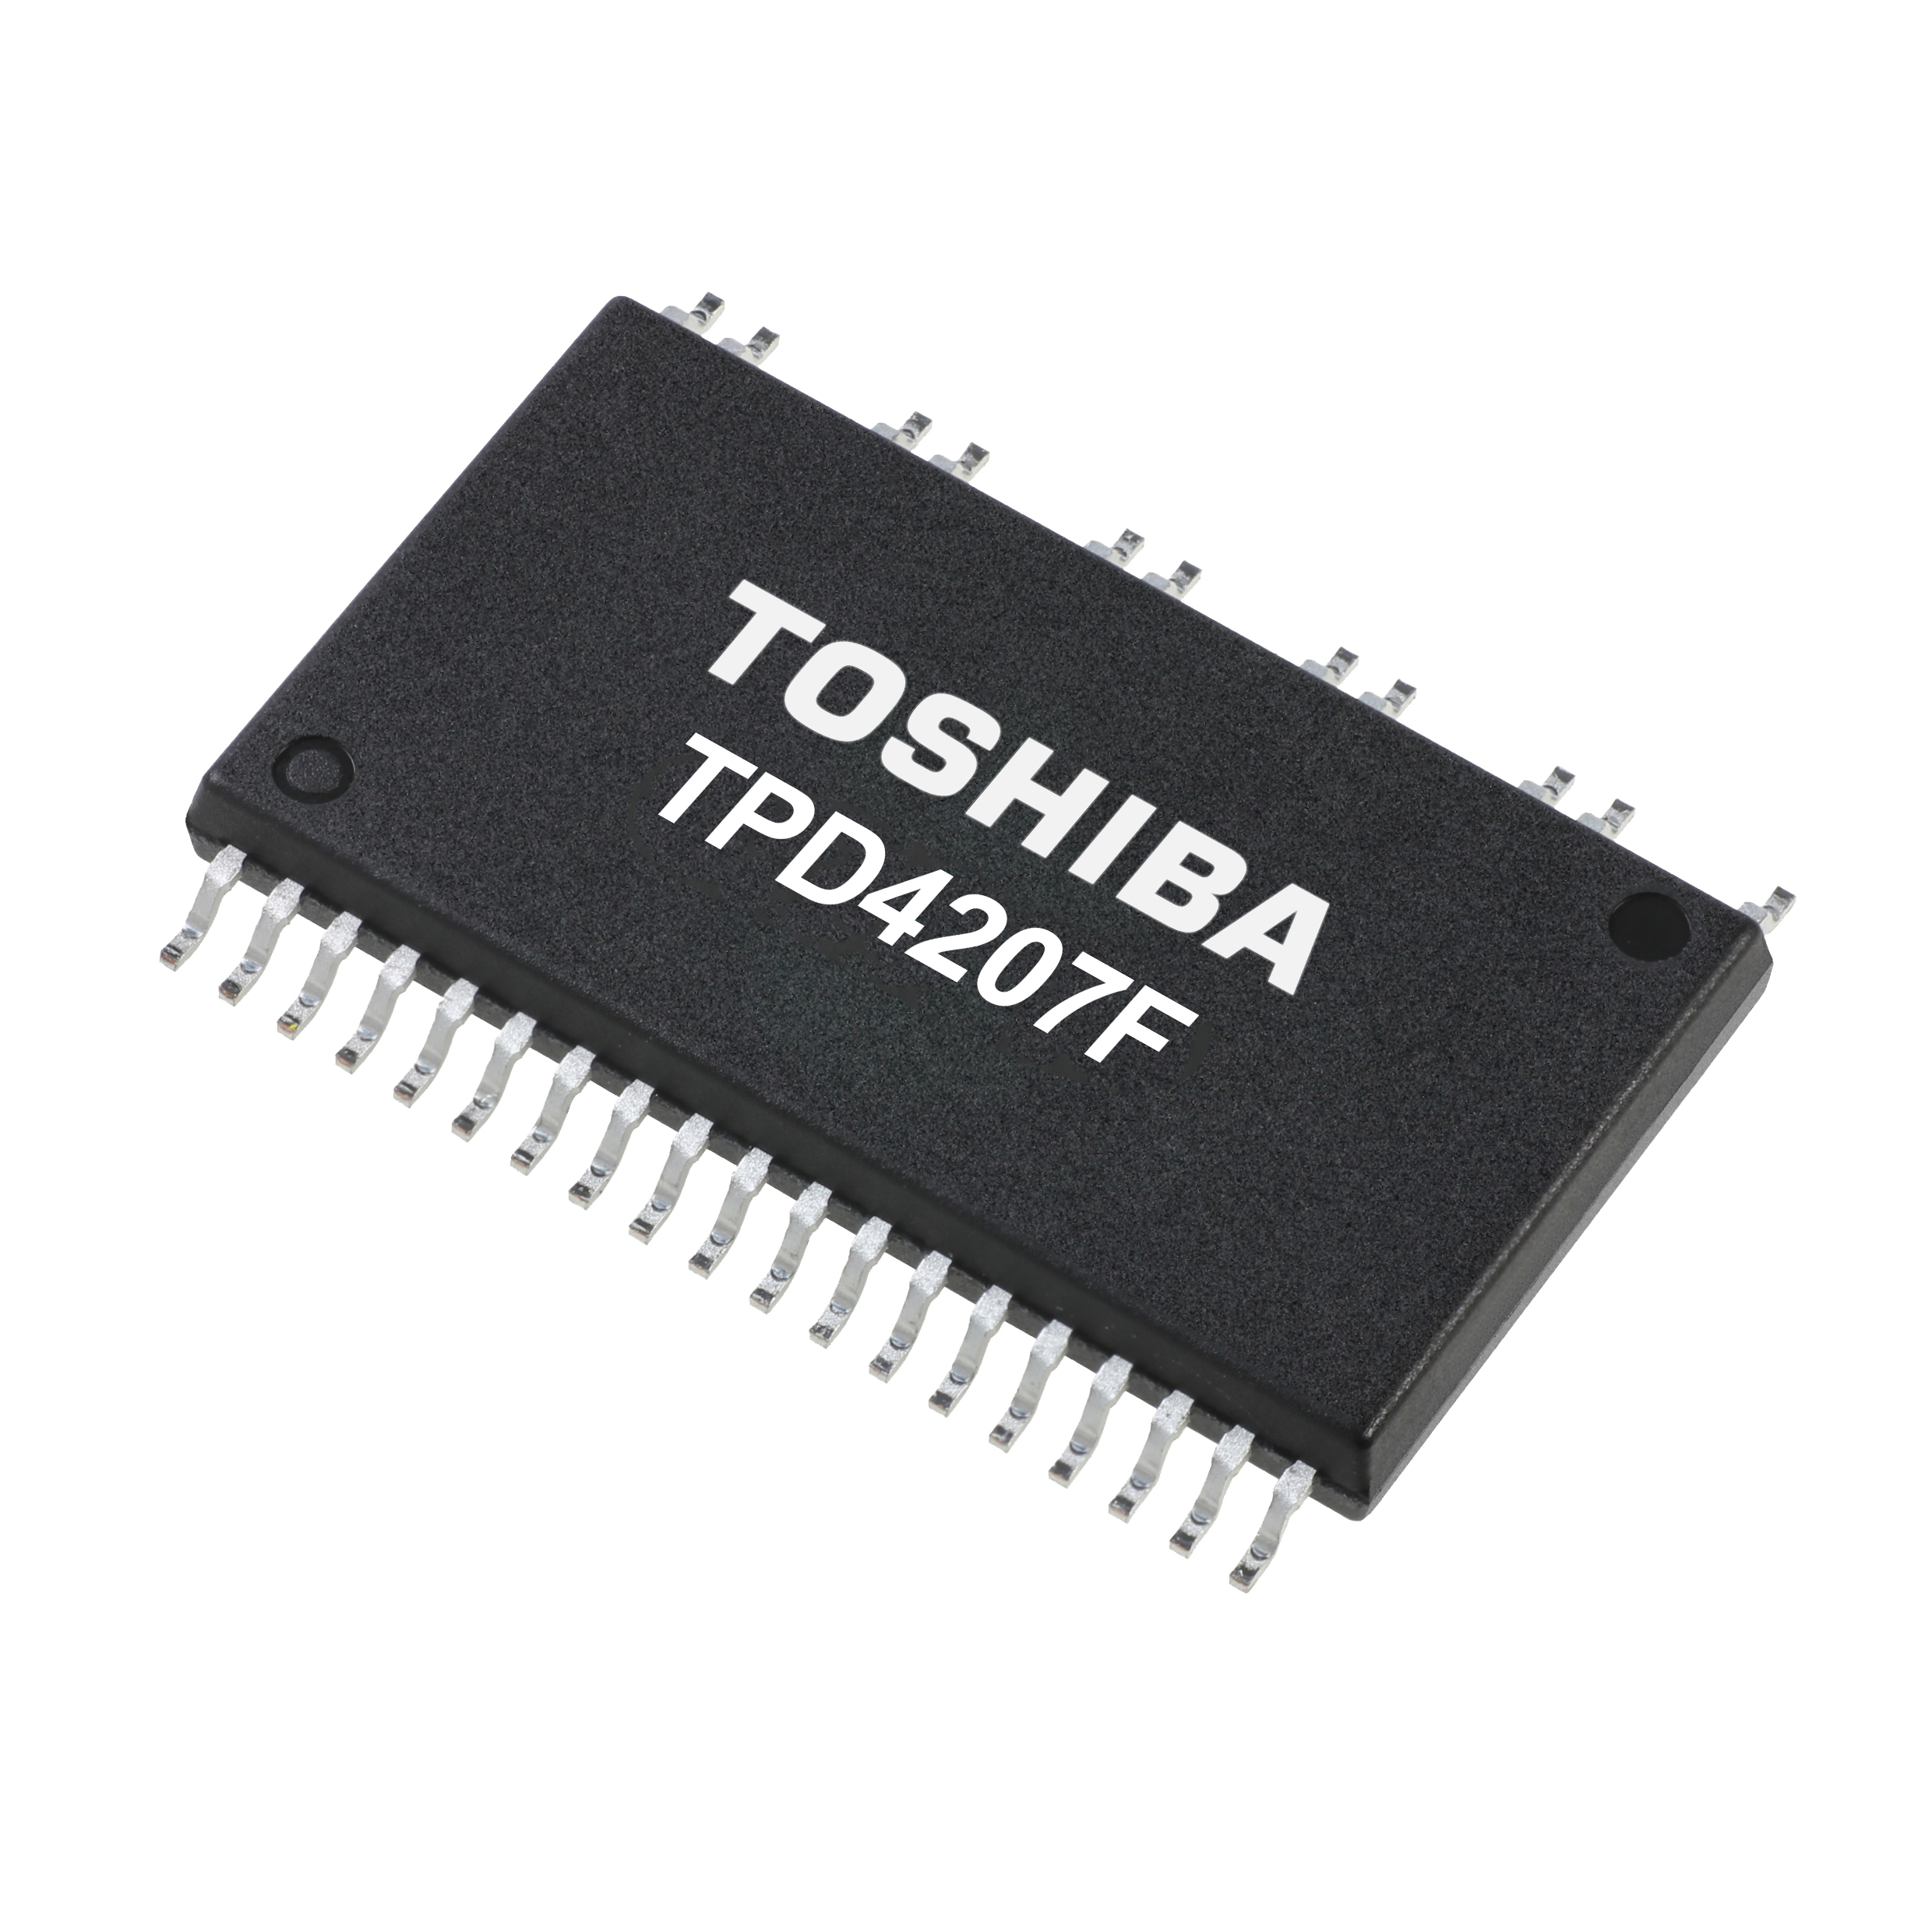 Toshiba increases current capability of their high-voltage intelligent power devices